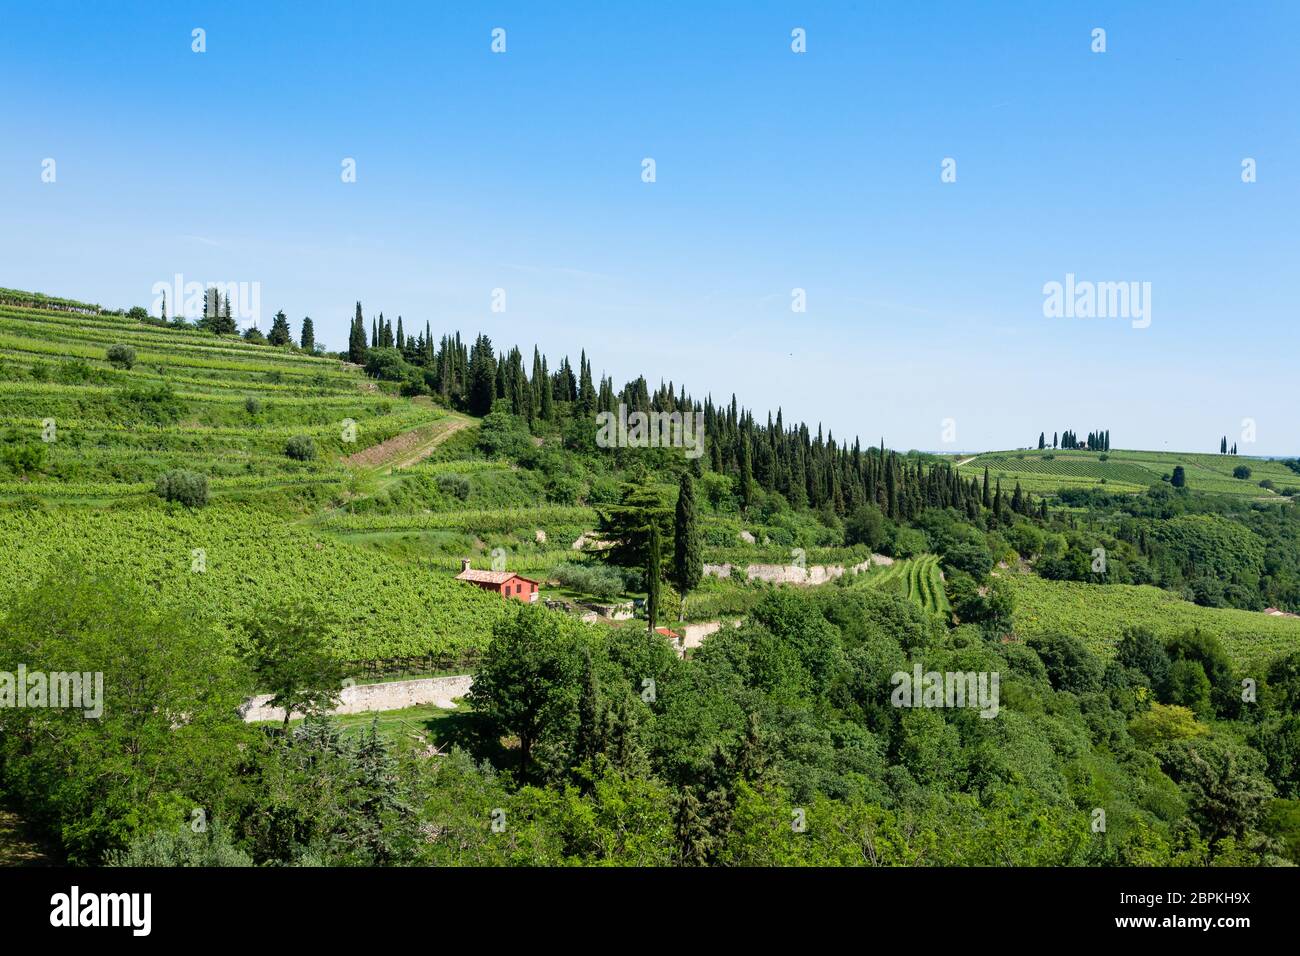 Vineyards from Soave, famous wine area. Italian countryside Stock Photo